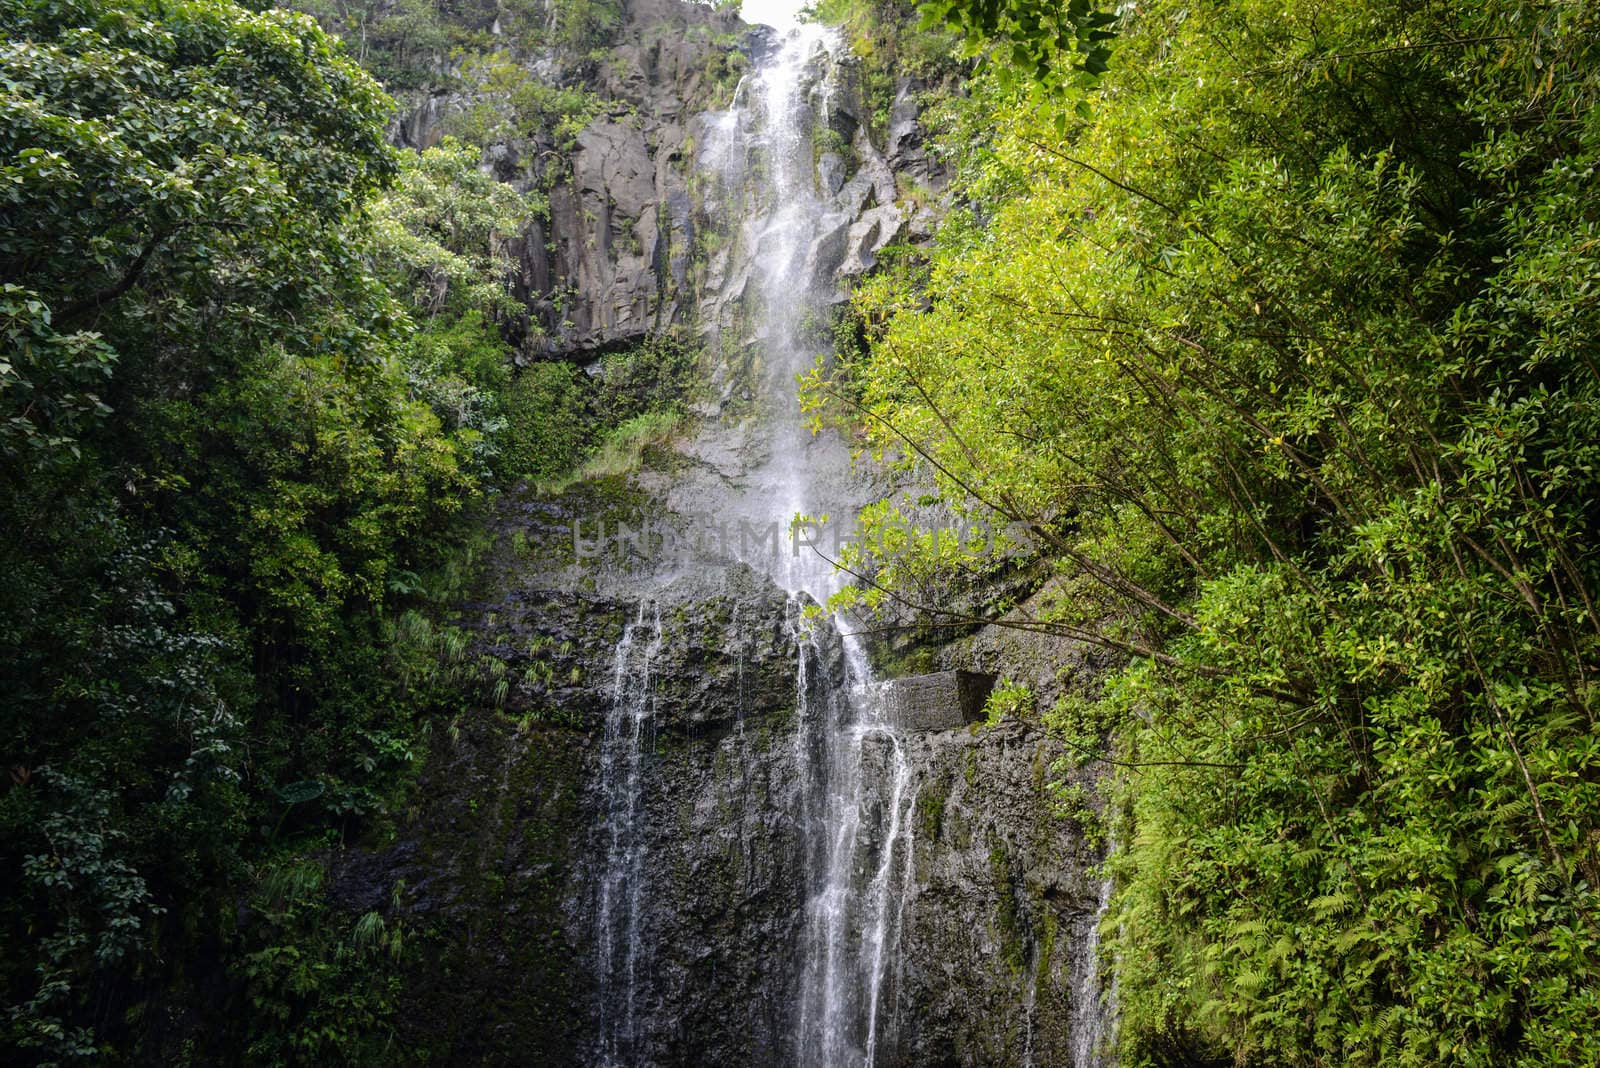 Waterfall in Maui Hawaii along the road to Hana by bbourdages